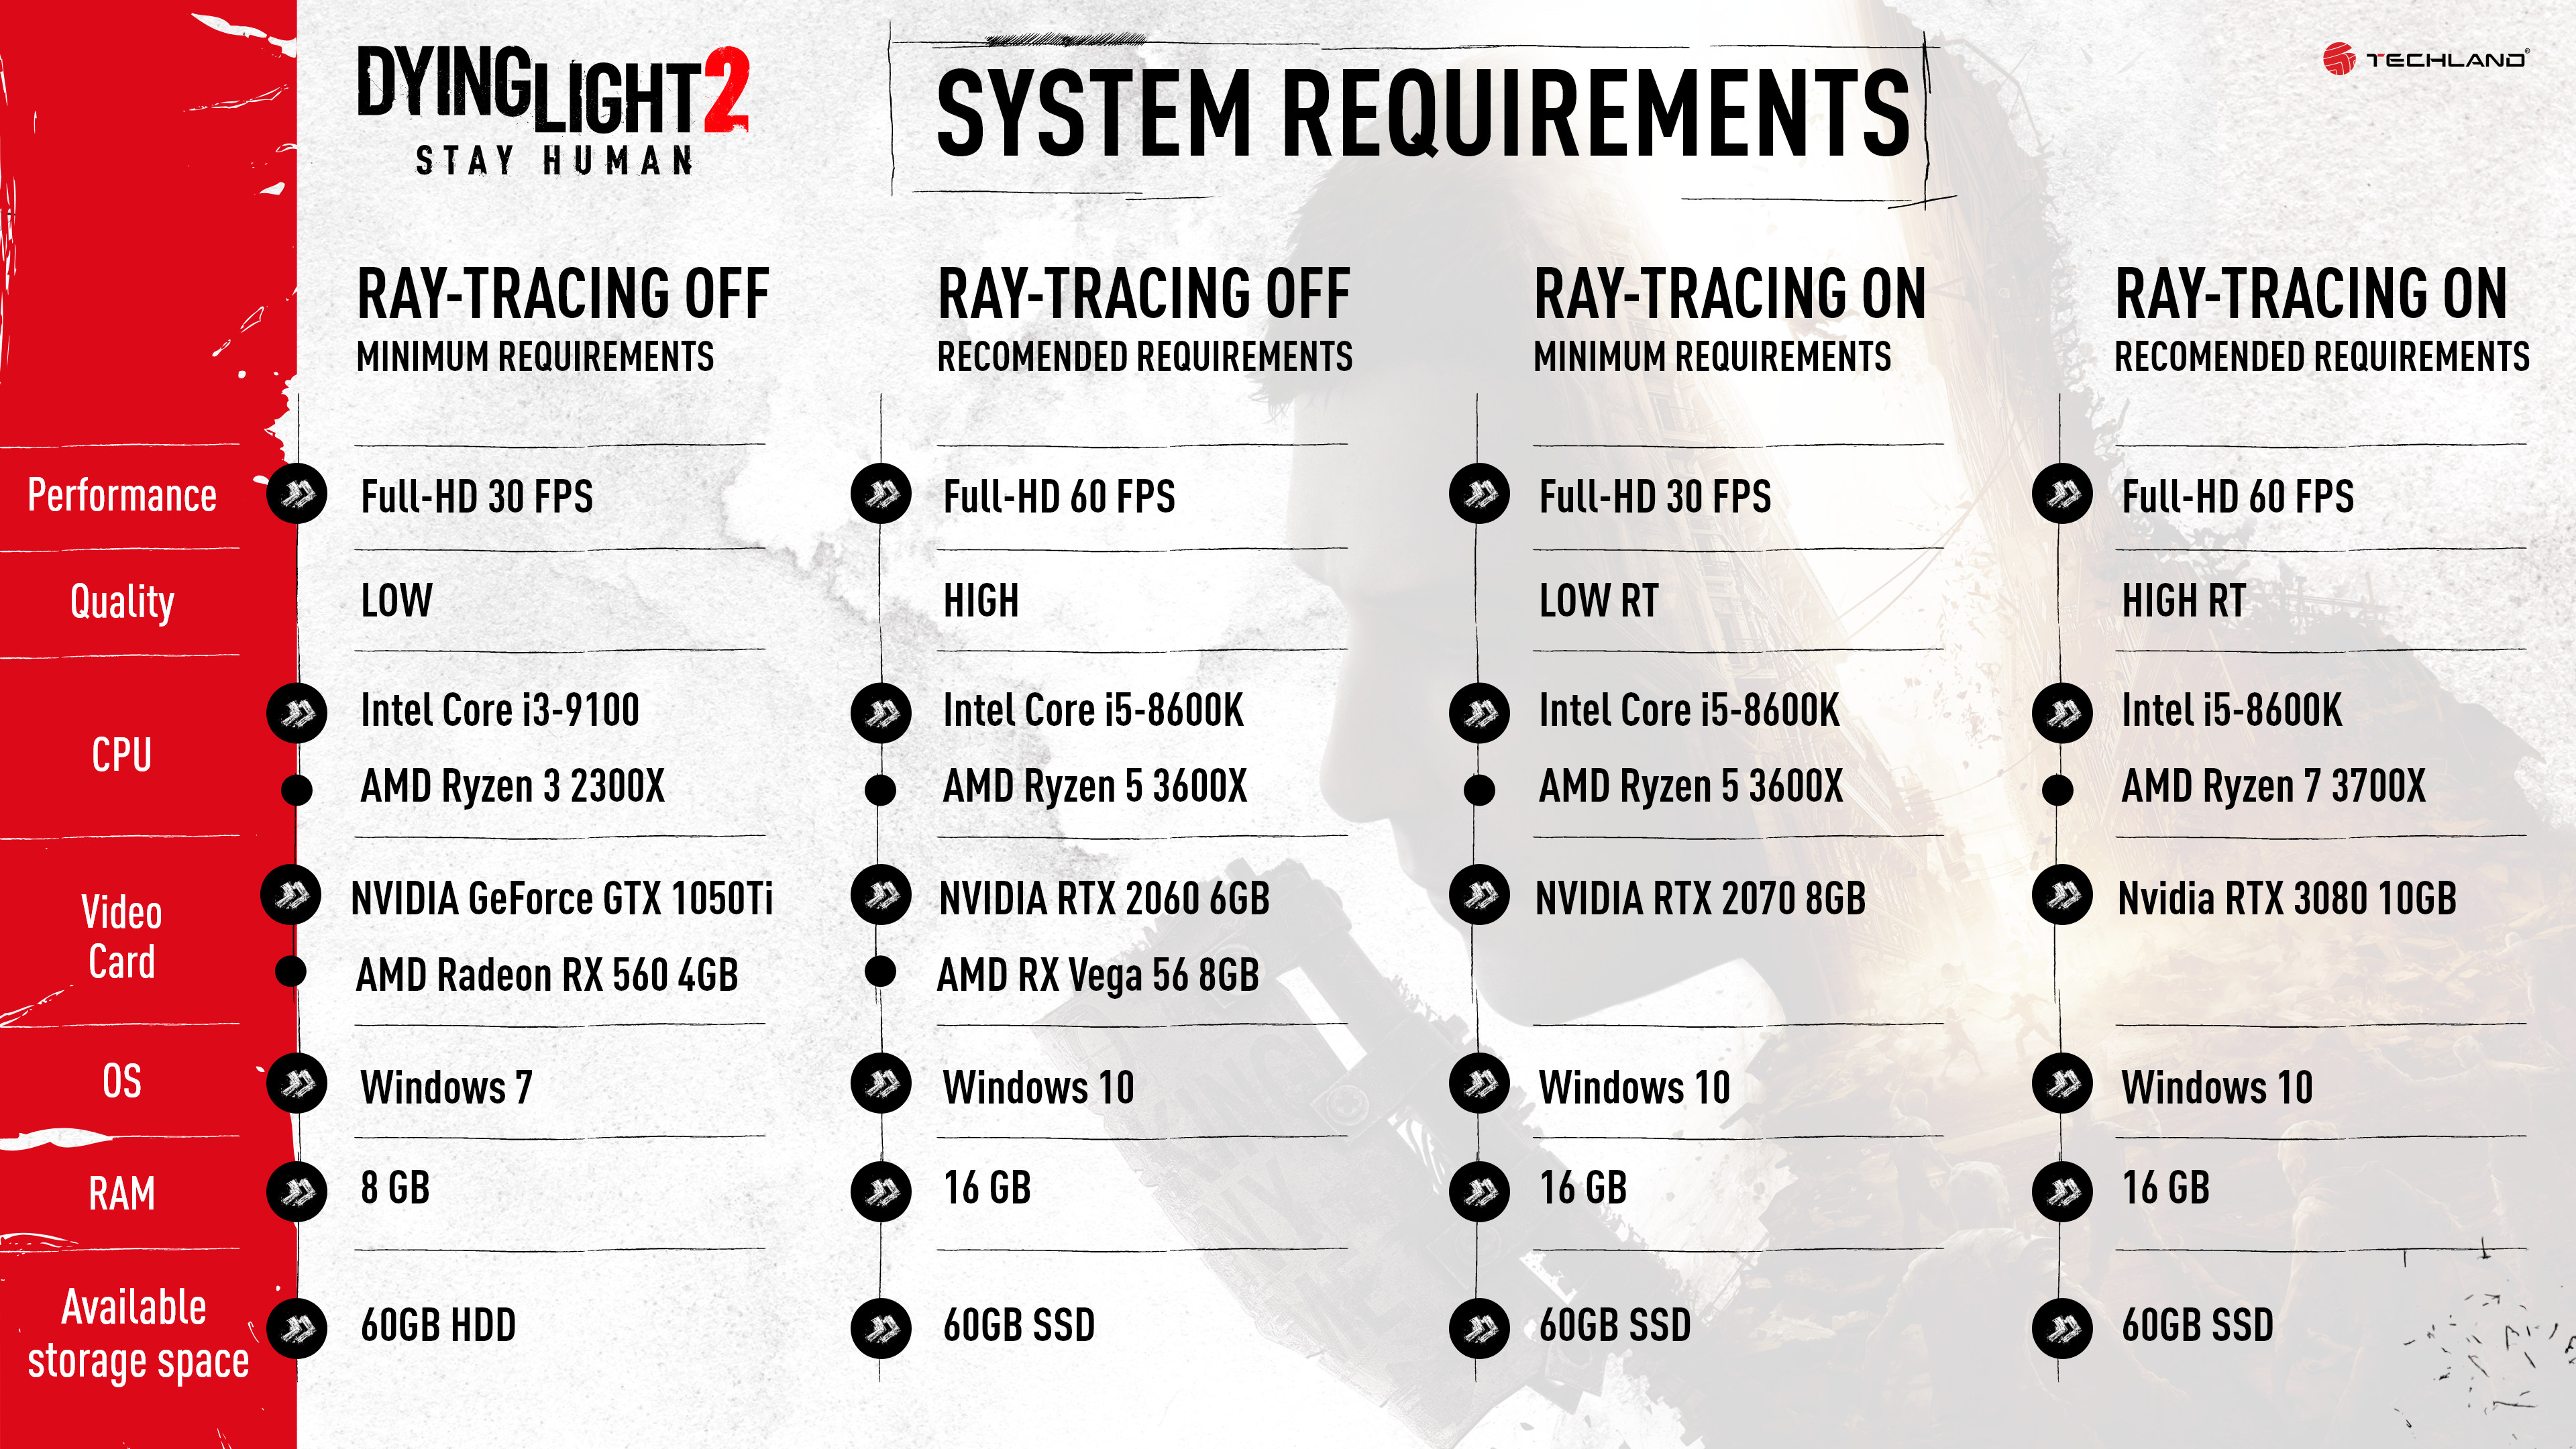 Dying Light 2 PC system requirements